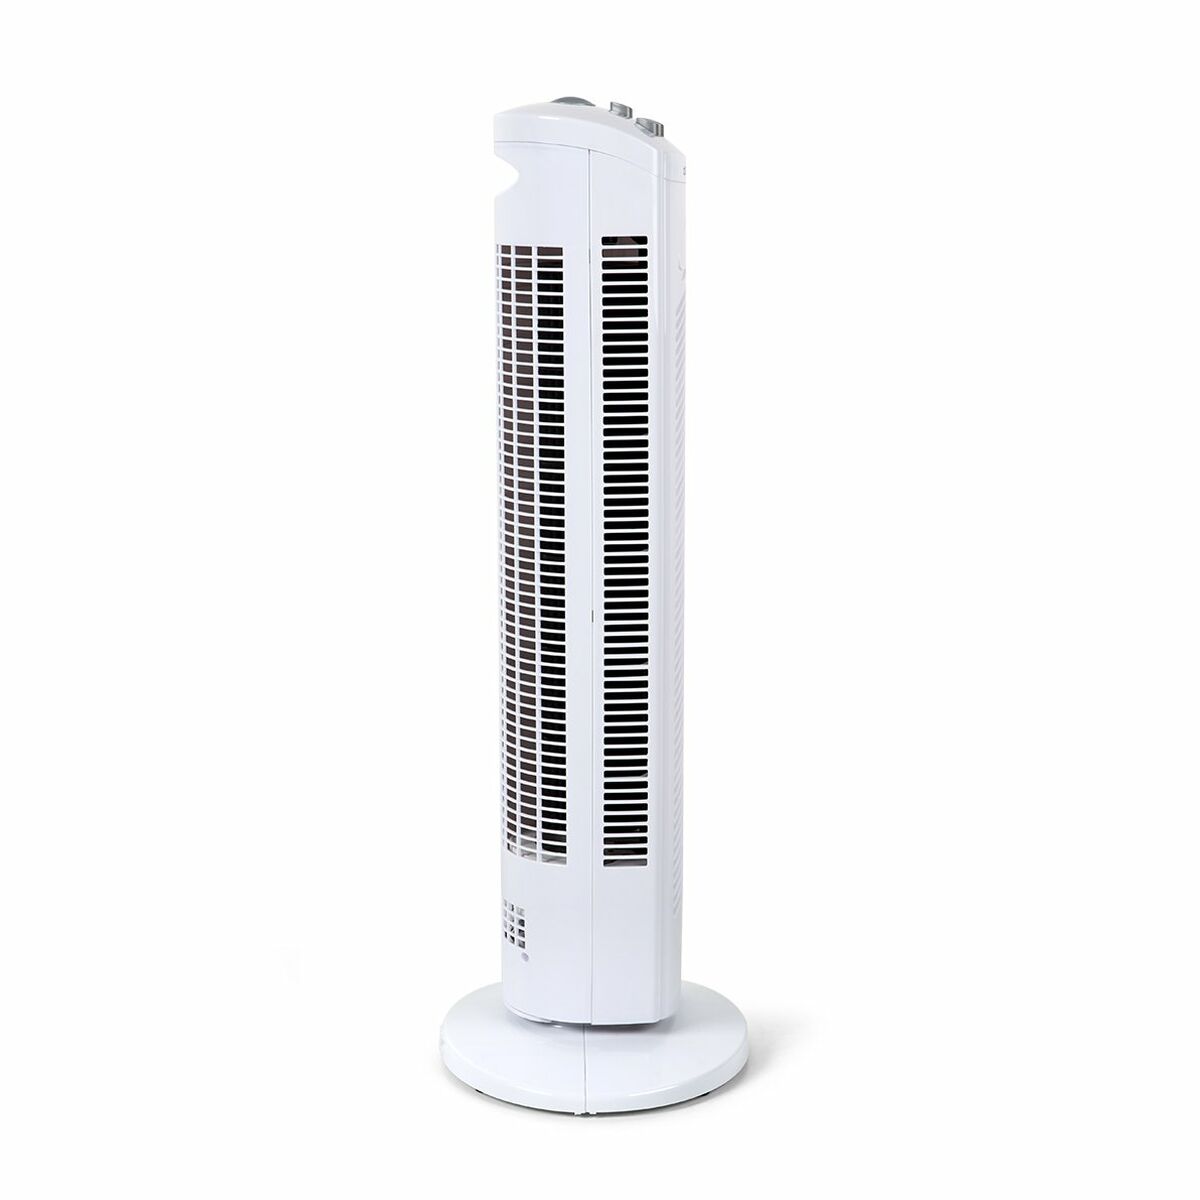 Tower Fan Orbegozo TW0745 White, Orbegozo, Home and cooking, Portable air conditioning, tower-fan-orbegozo-tw0745-white, Brand_Orbegozo, category-reference-2399, category-reference-2450, category-reference-2451, category-reference-t-19656, category-reference-t-21087, category-reference-t-25217, Condition_NEW, ferretería, Price_50 - 100, summer, RiotNook